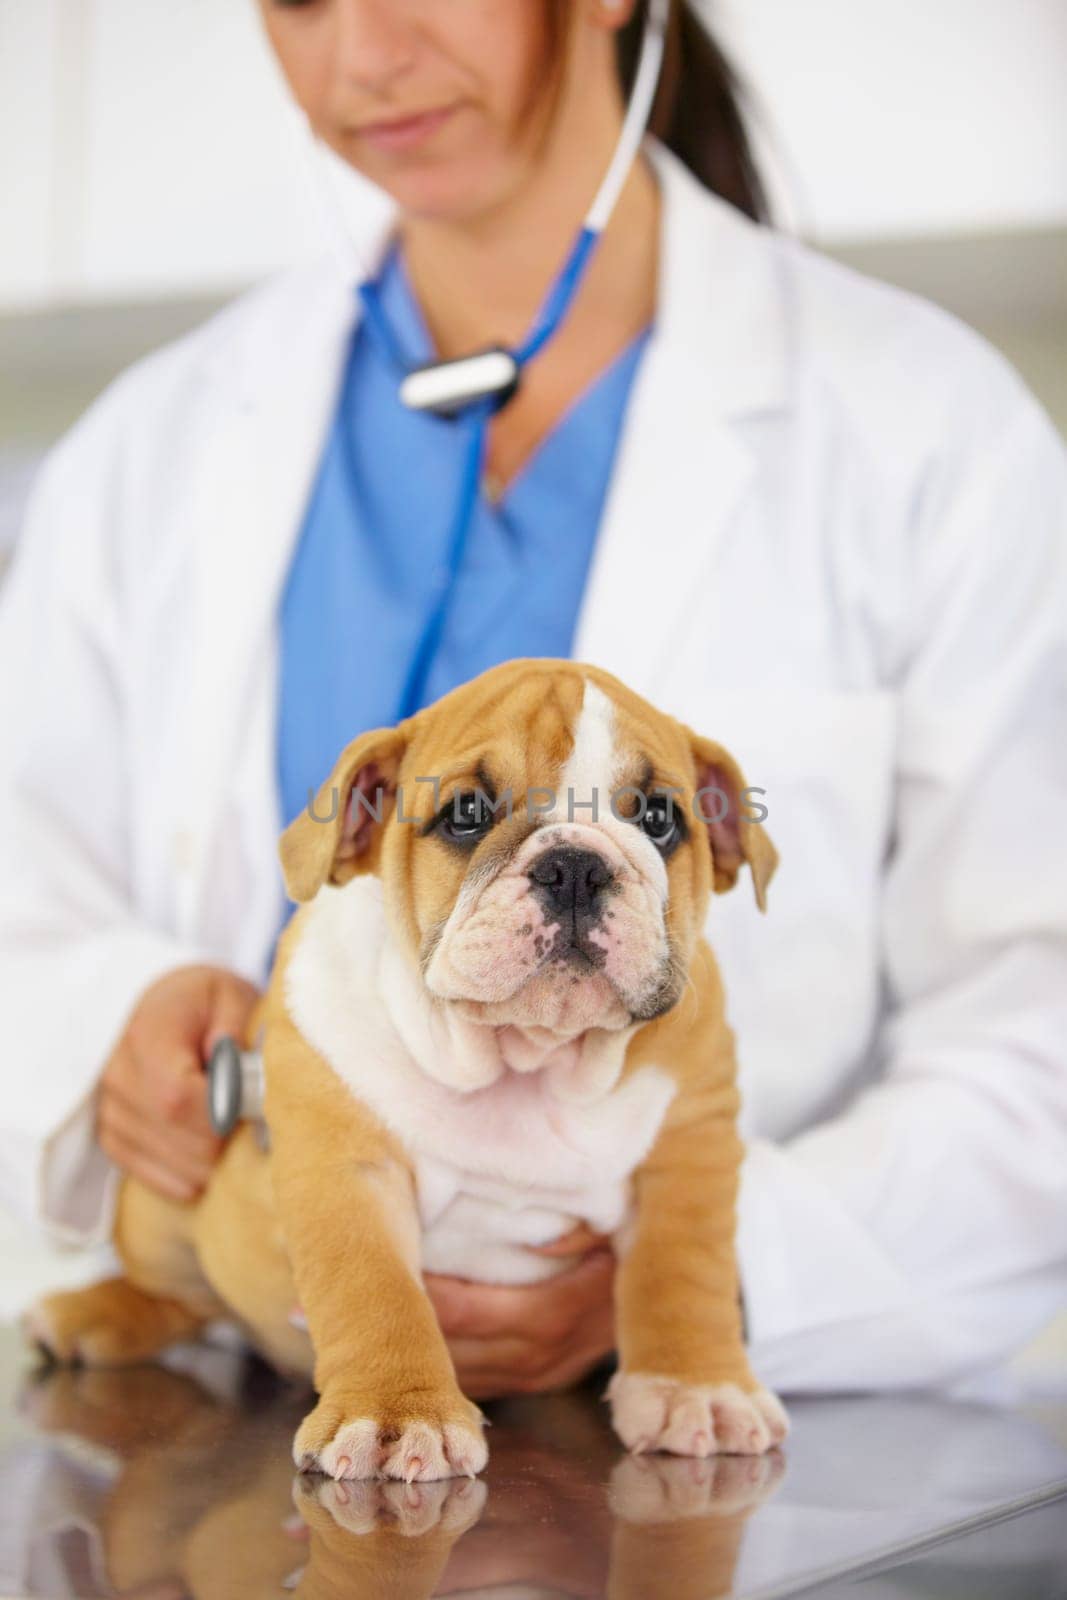 Heartbeat, hands of doctor or dog in vet for animal healthcare check up consultation for nursing. Nurse listening, veterinary clinic or sick bulldog pet or puppy in examination for medical test.